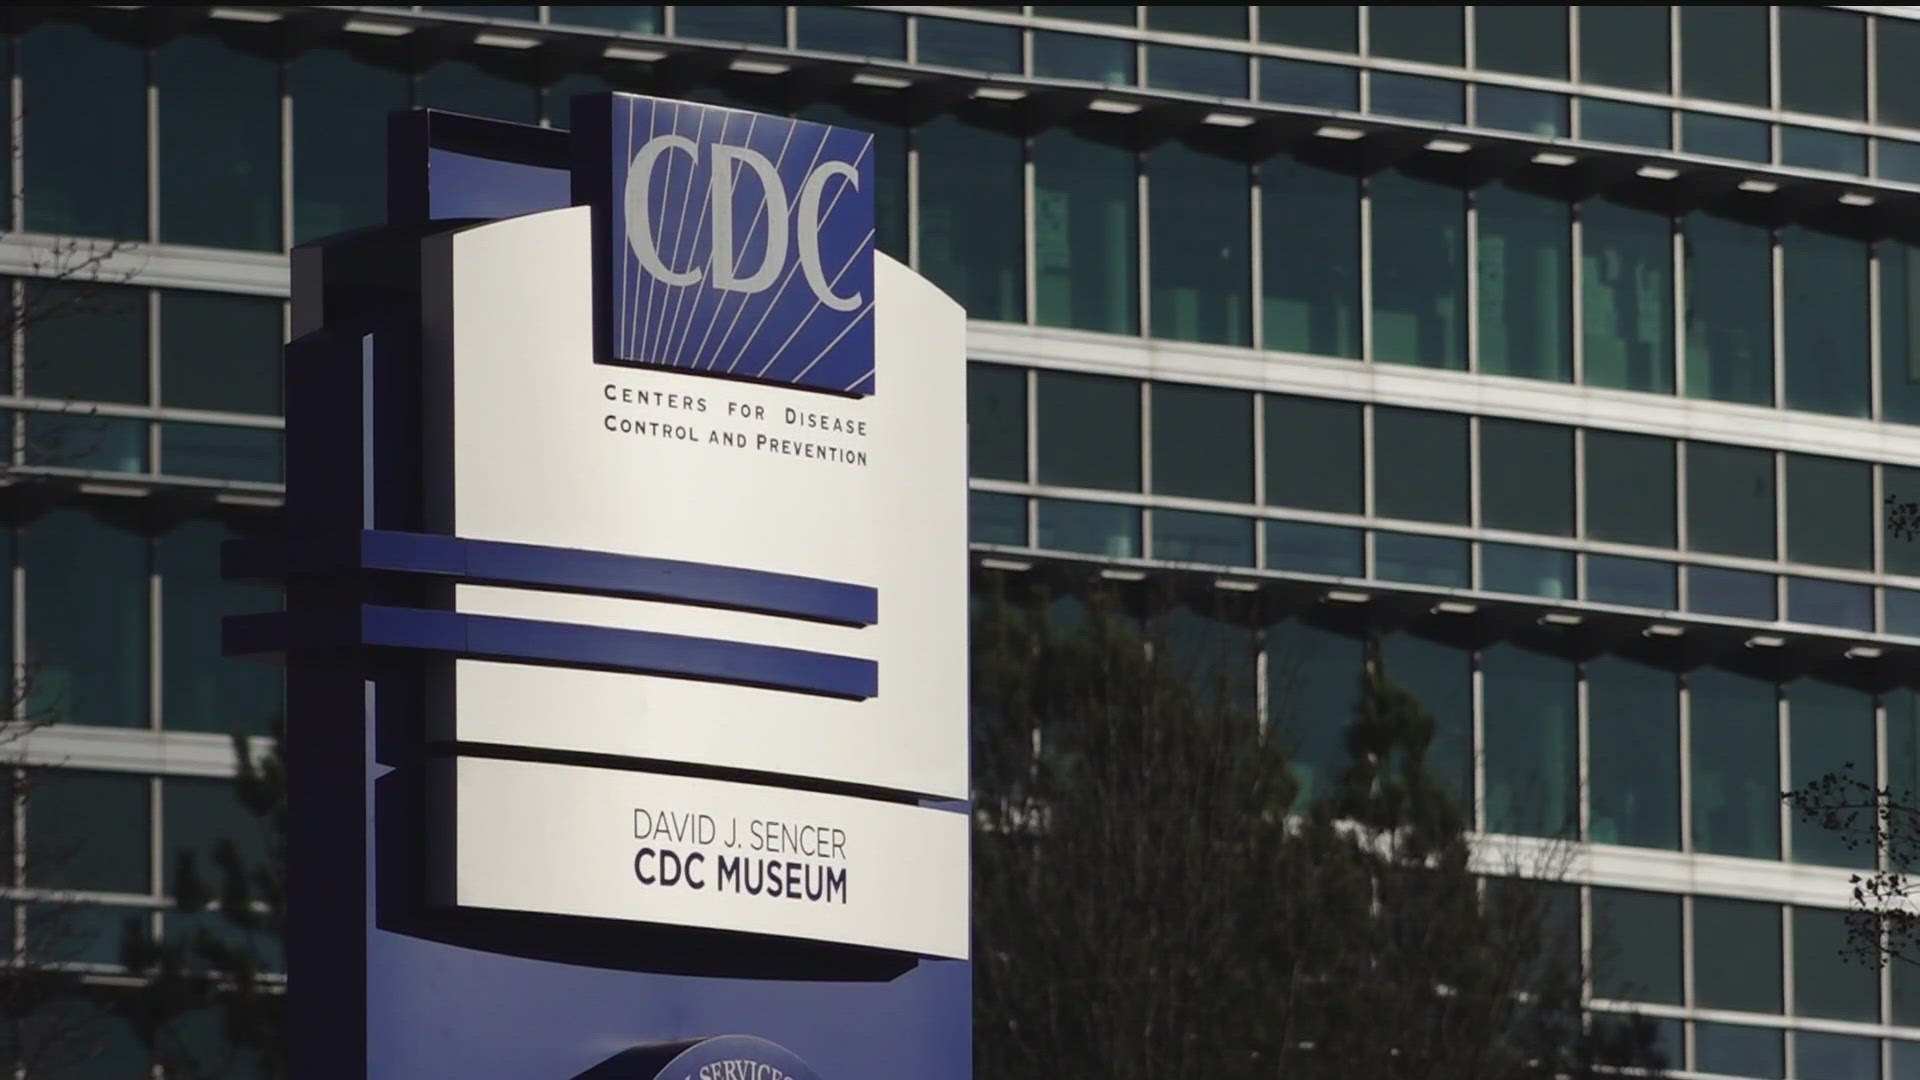 The Washington Post says the CDC plans to loosen isolations recommendations as early as this spring.